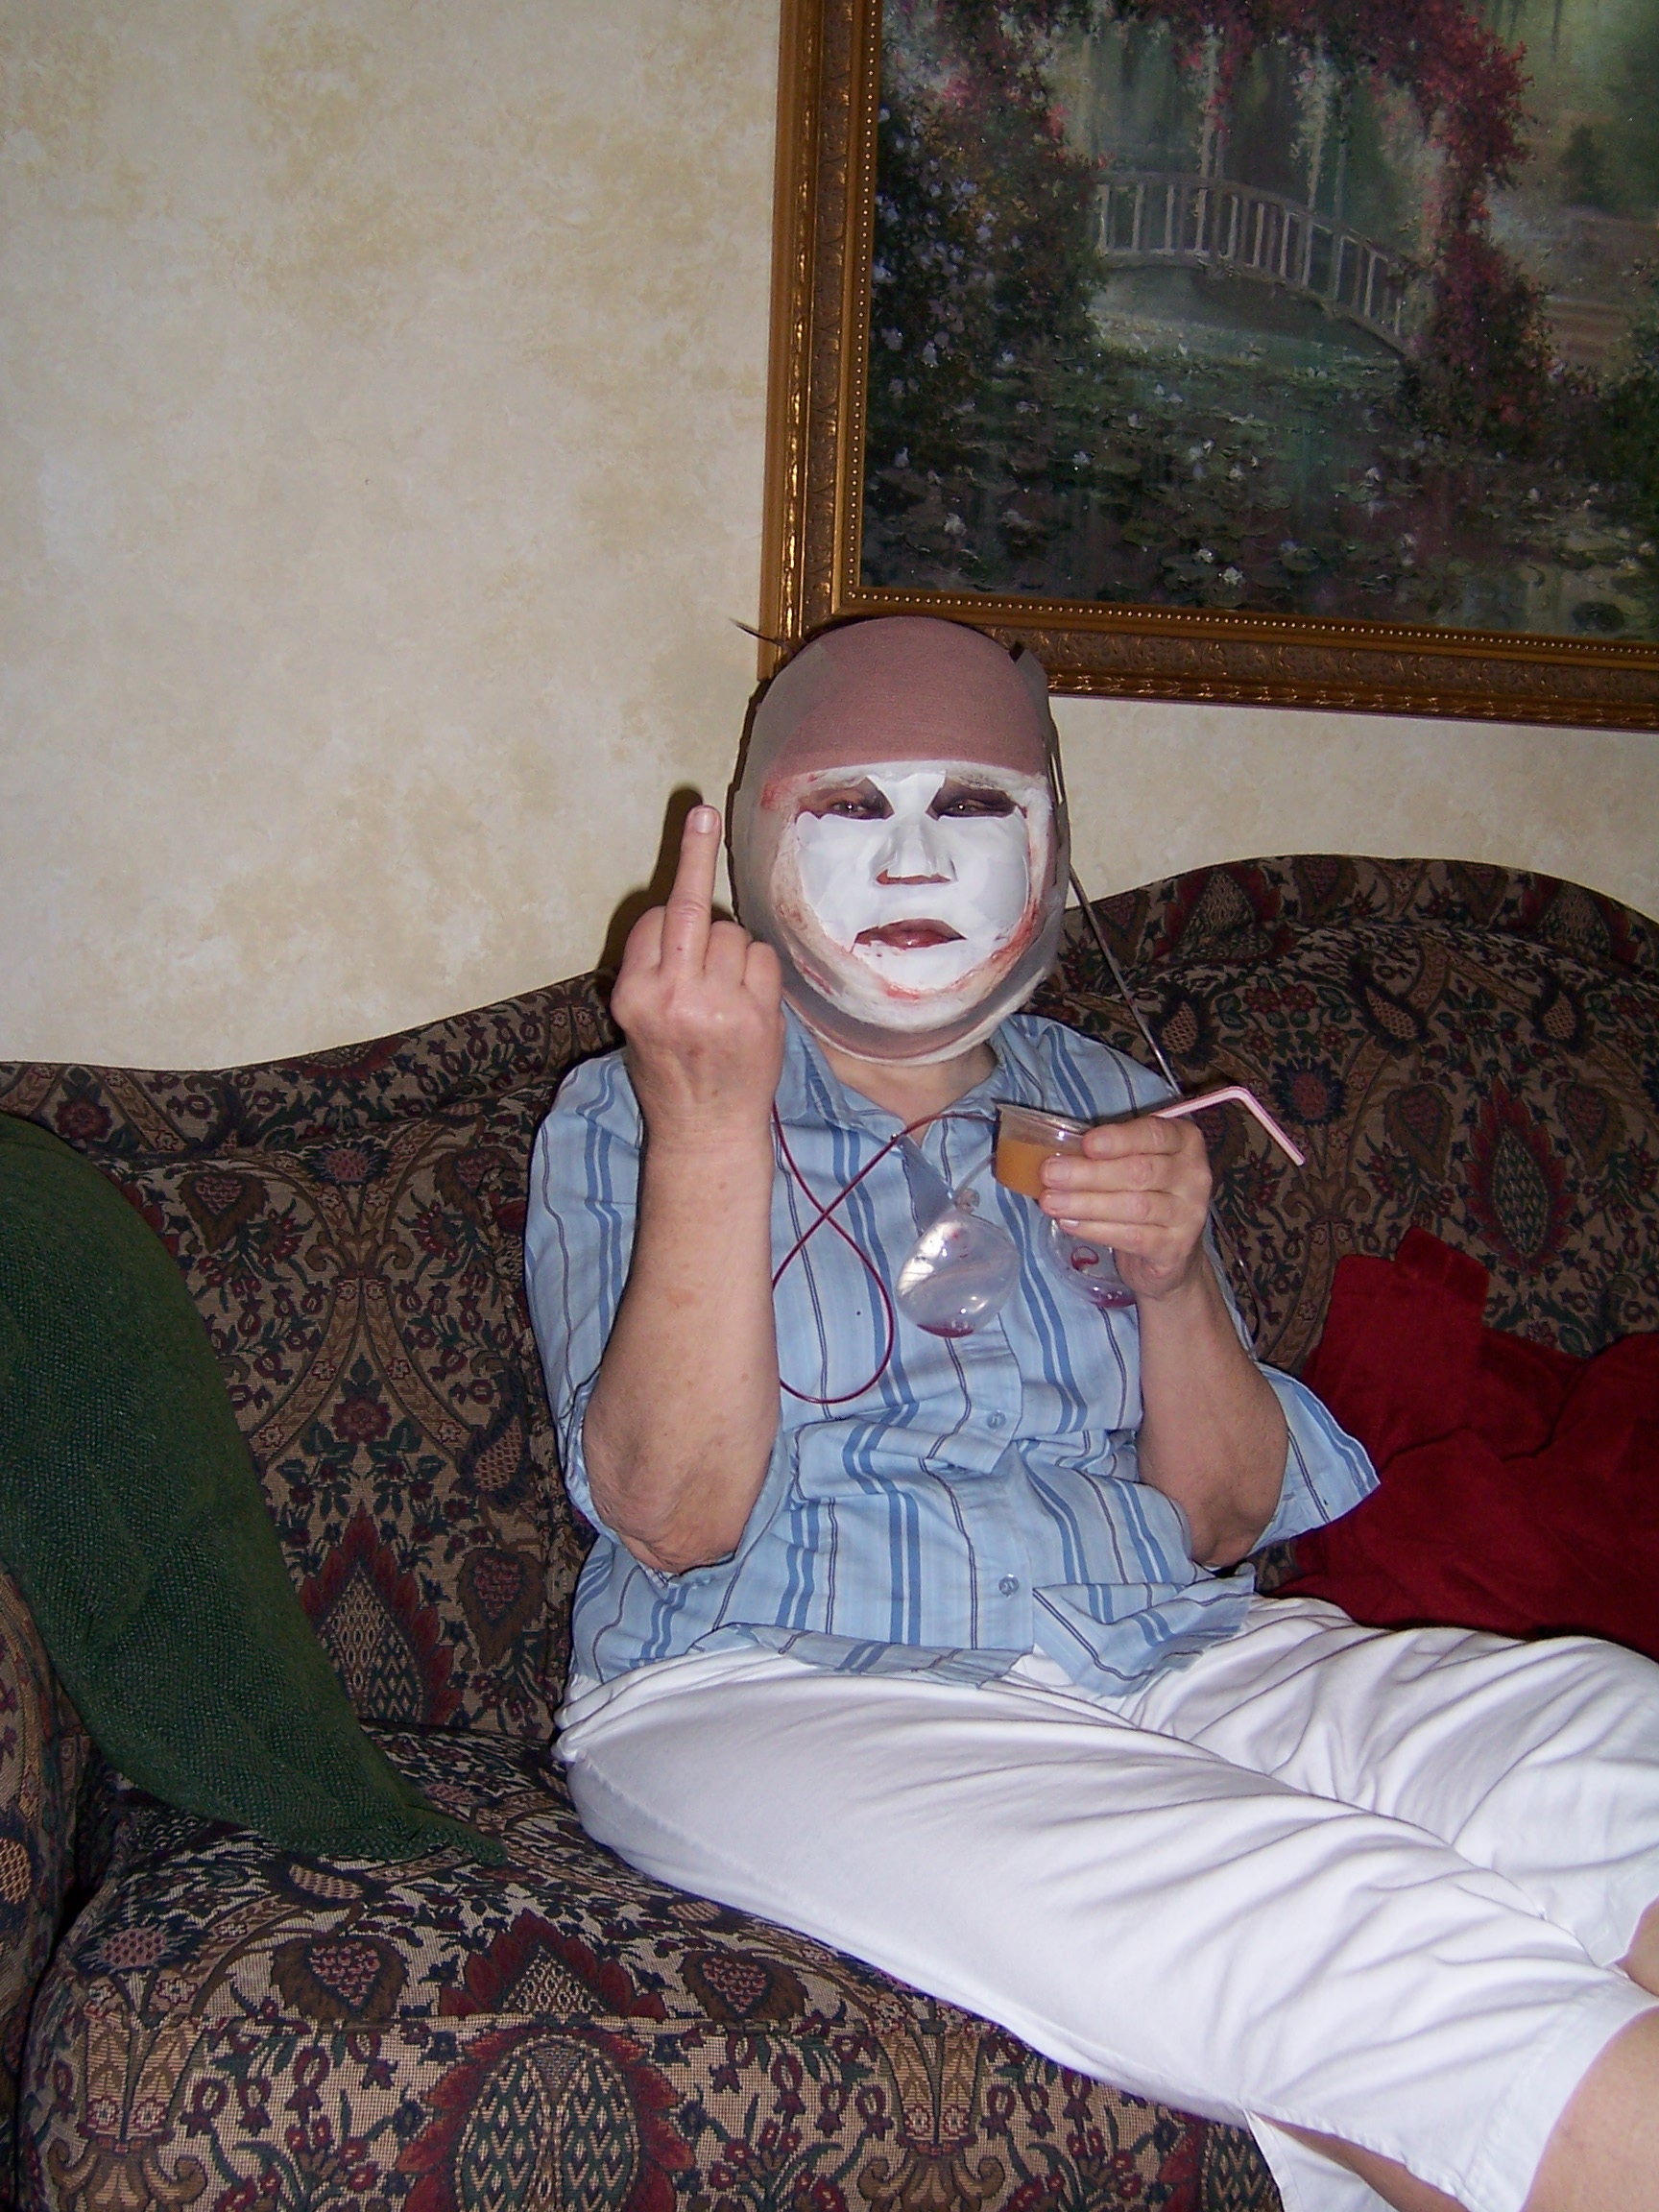 my grandma after face lift looks like a mike myers. oh and shes flicking off the camara, great role model eh? lol